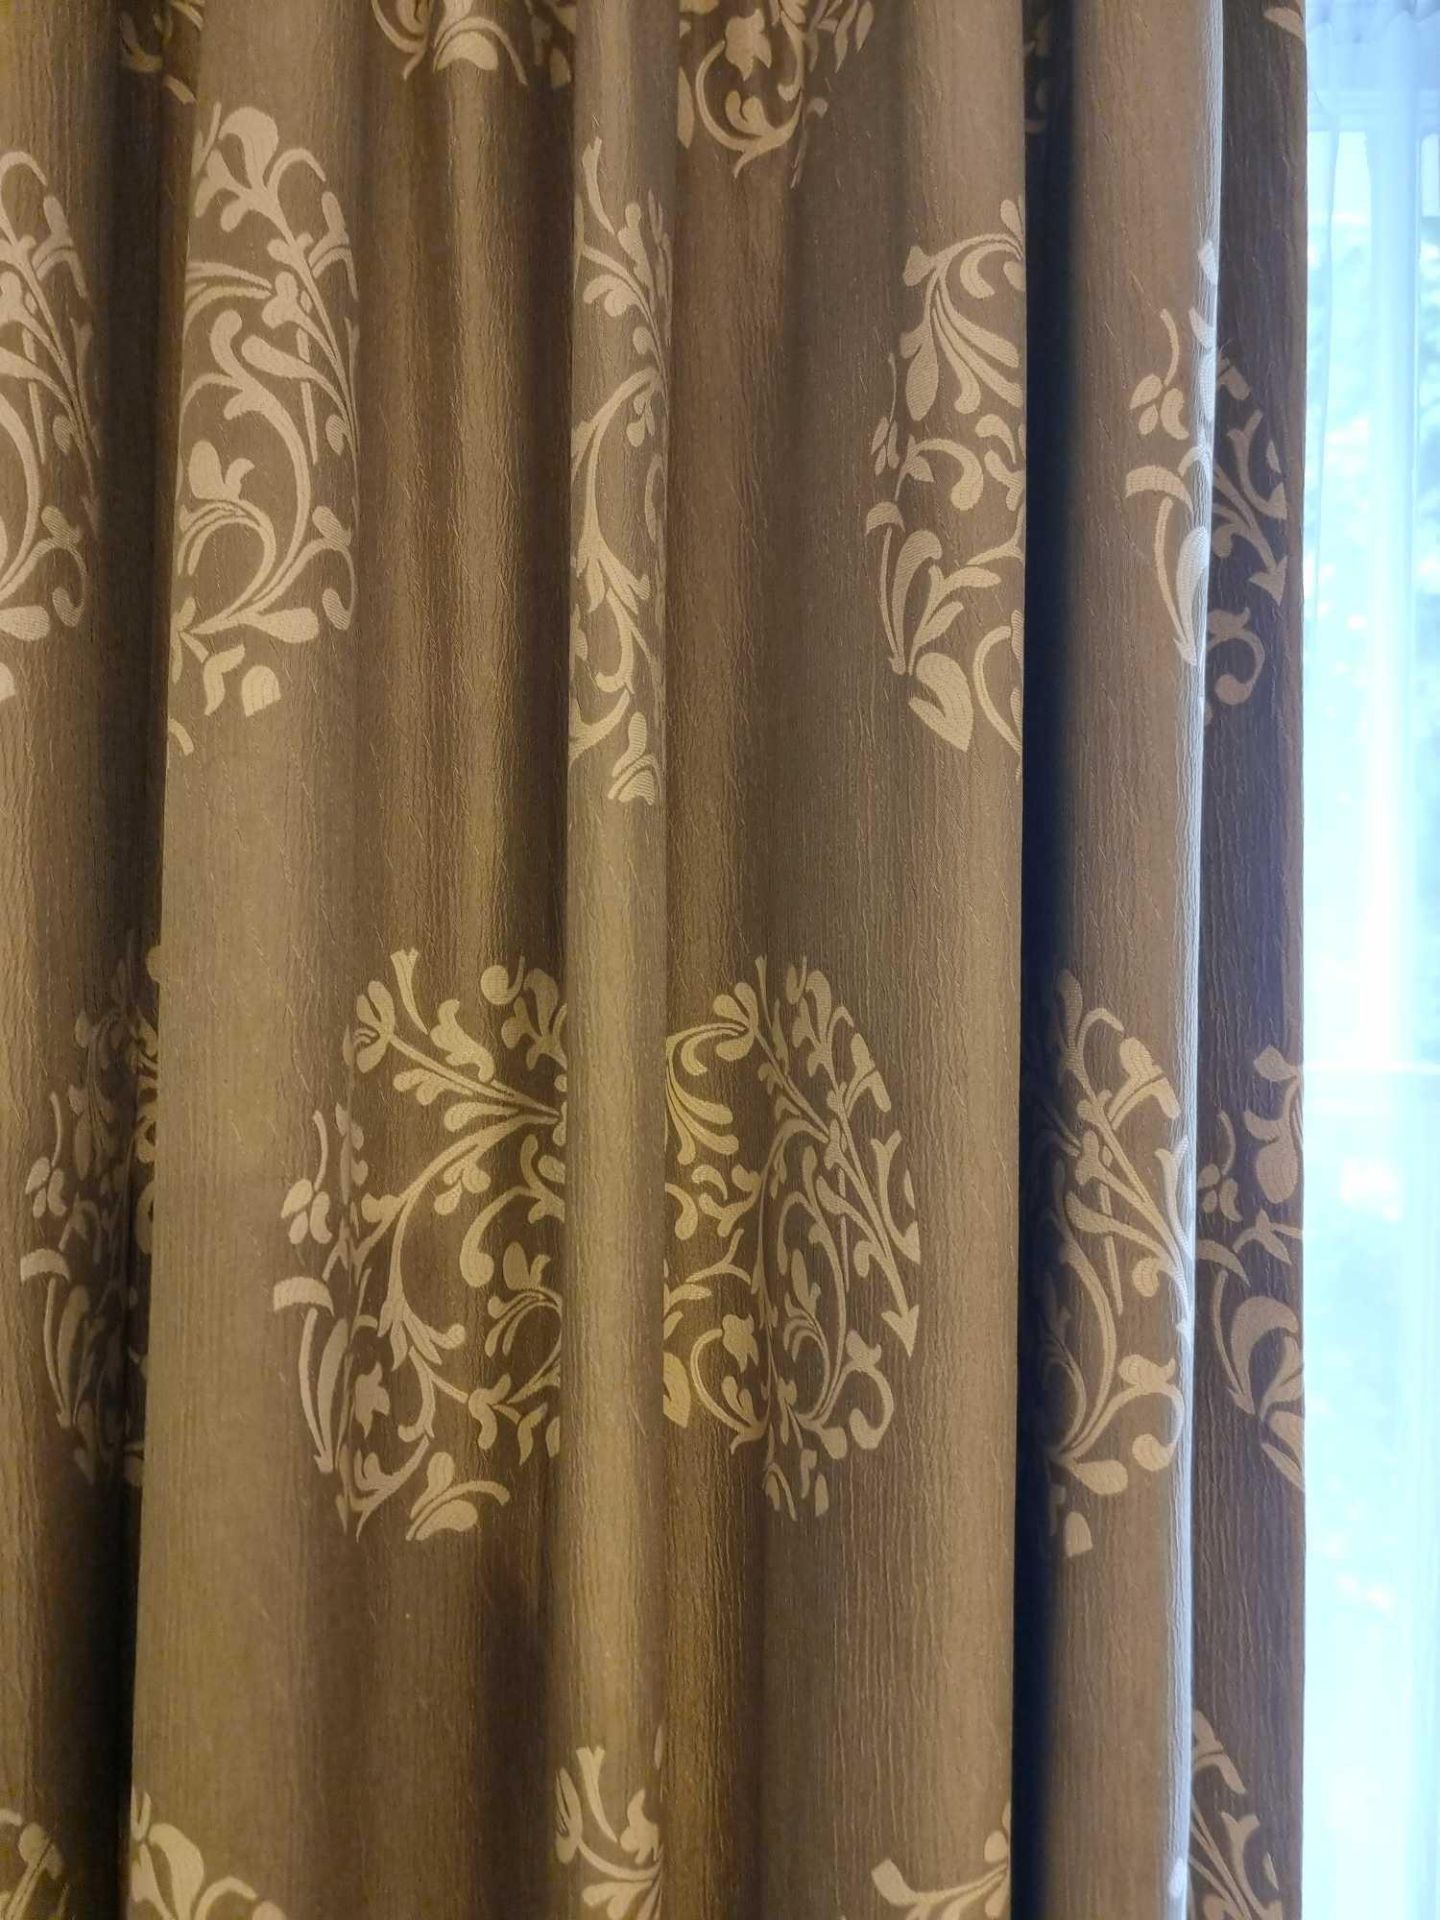 A Pair Of Lined Drapes Green And Gold Pattern On Curtain Track Span 140 X 210cm (Room 33) - Bild 2 aus 2